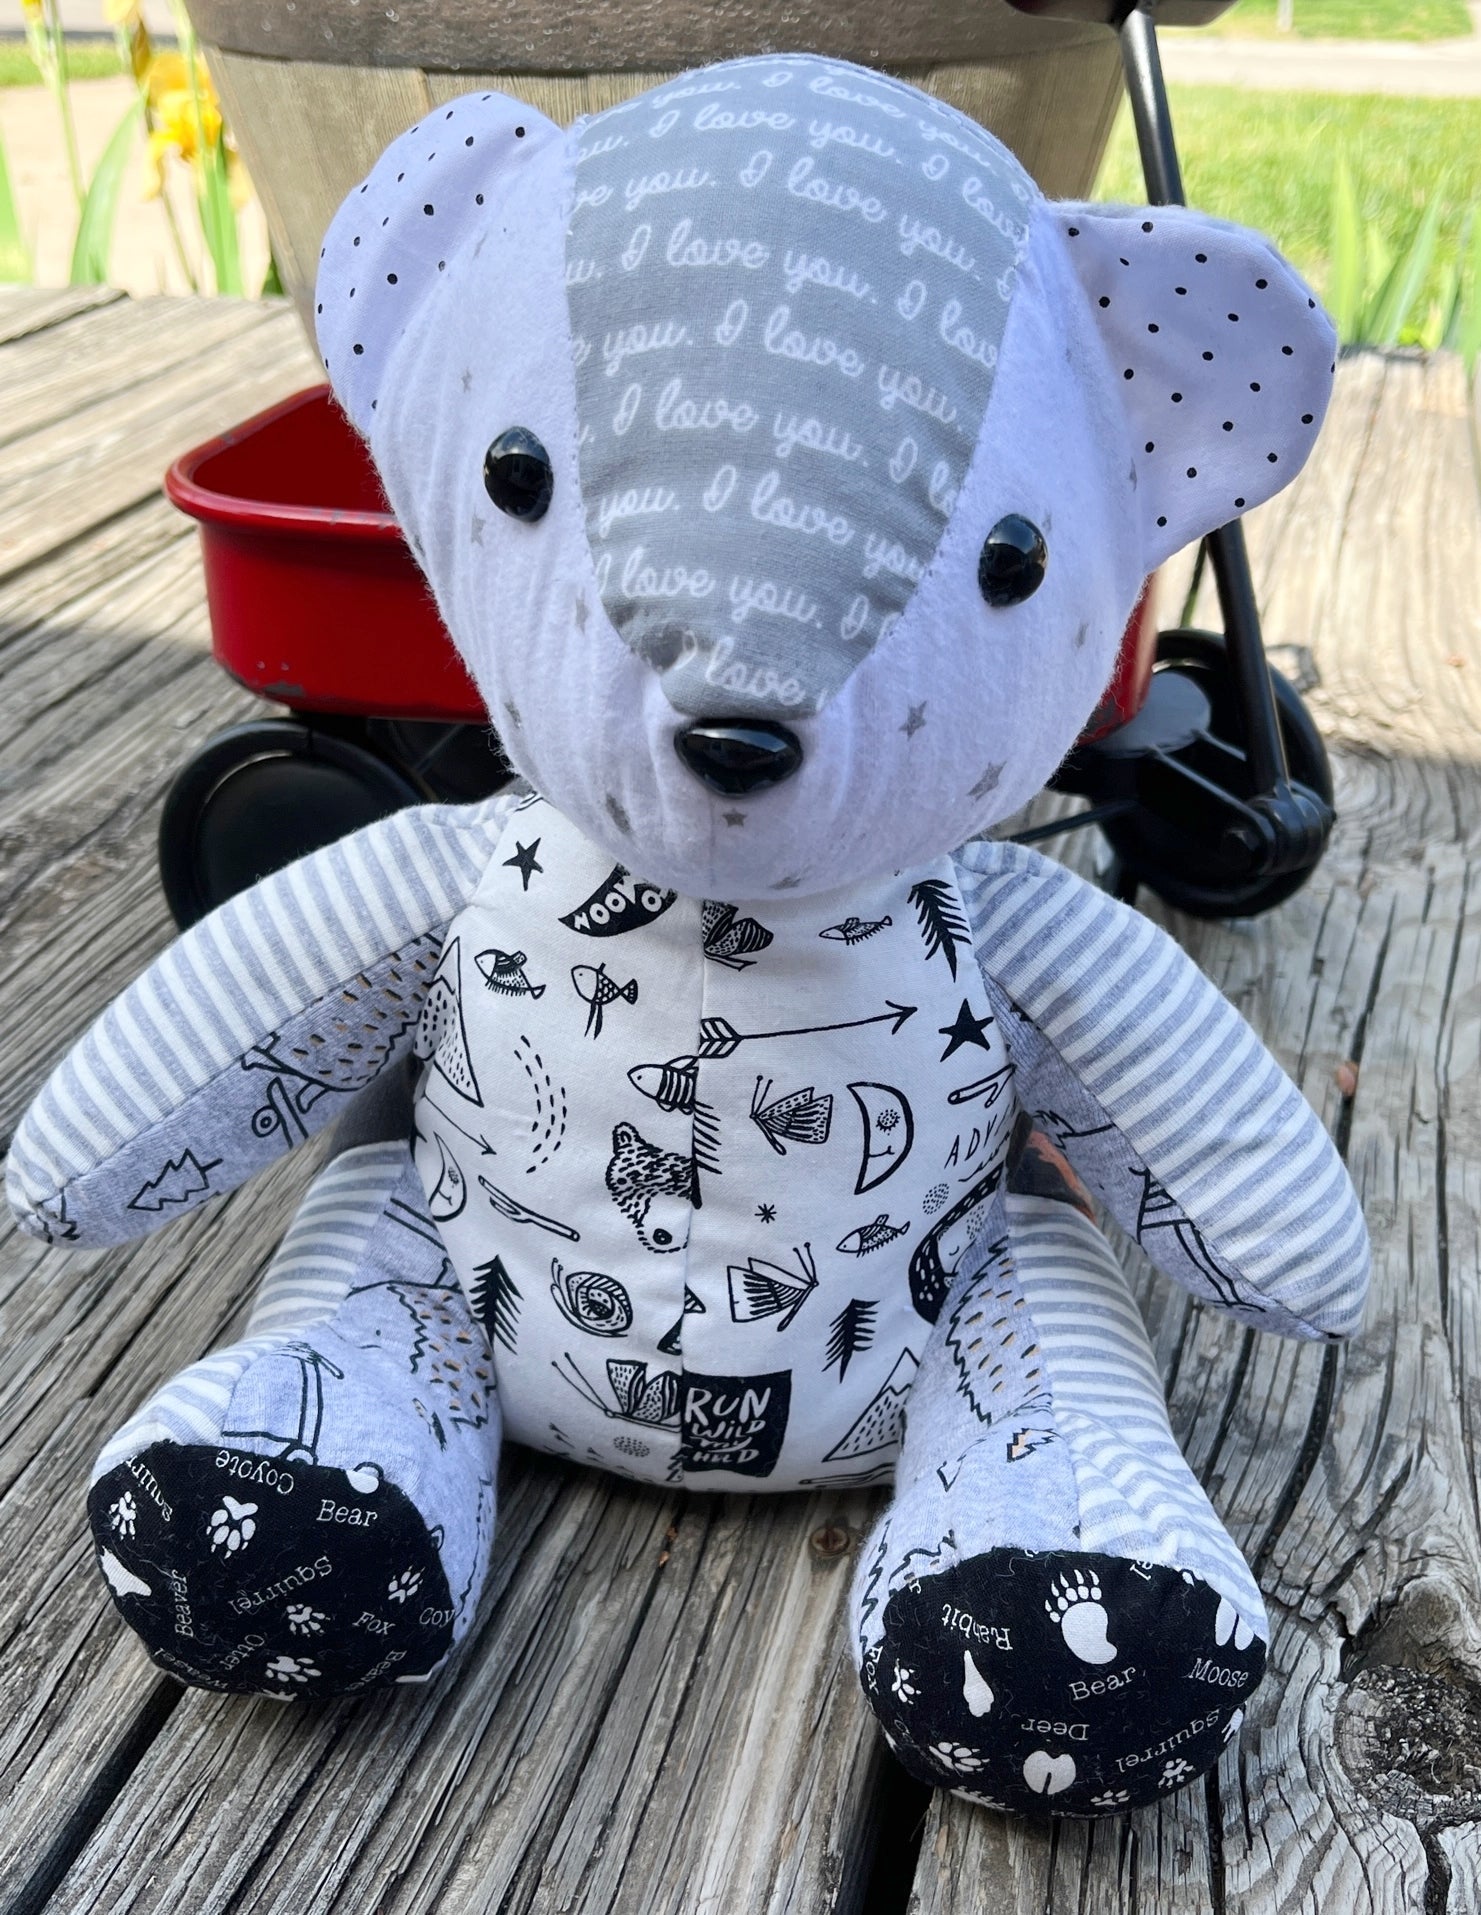 custom memory bear (shown boy, made from baby clothes)